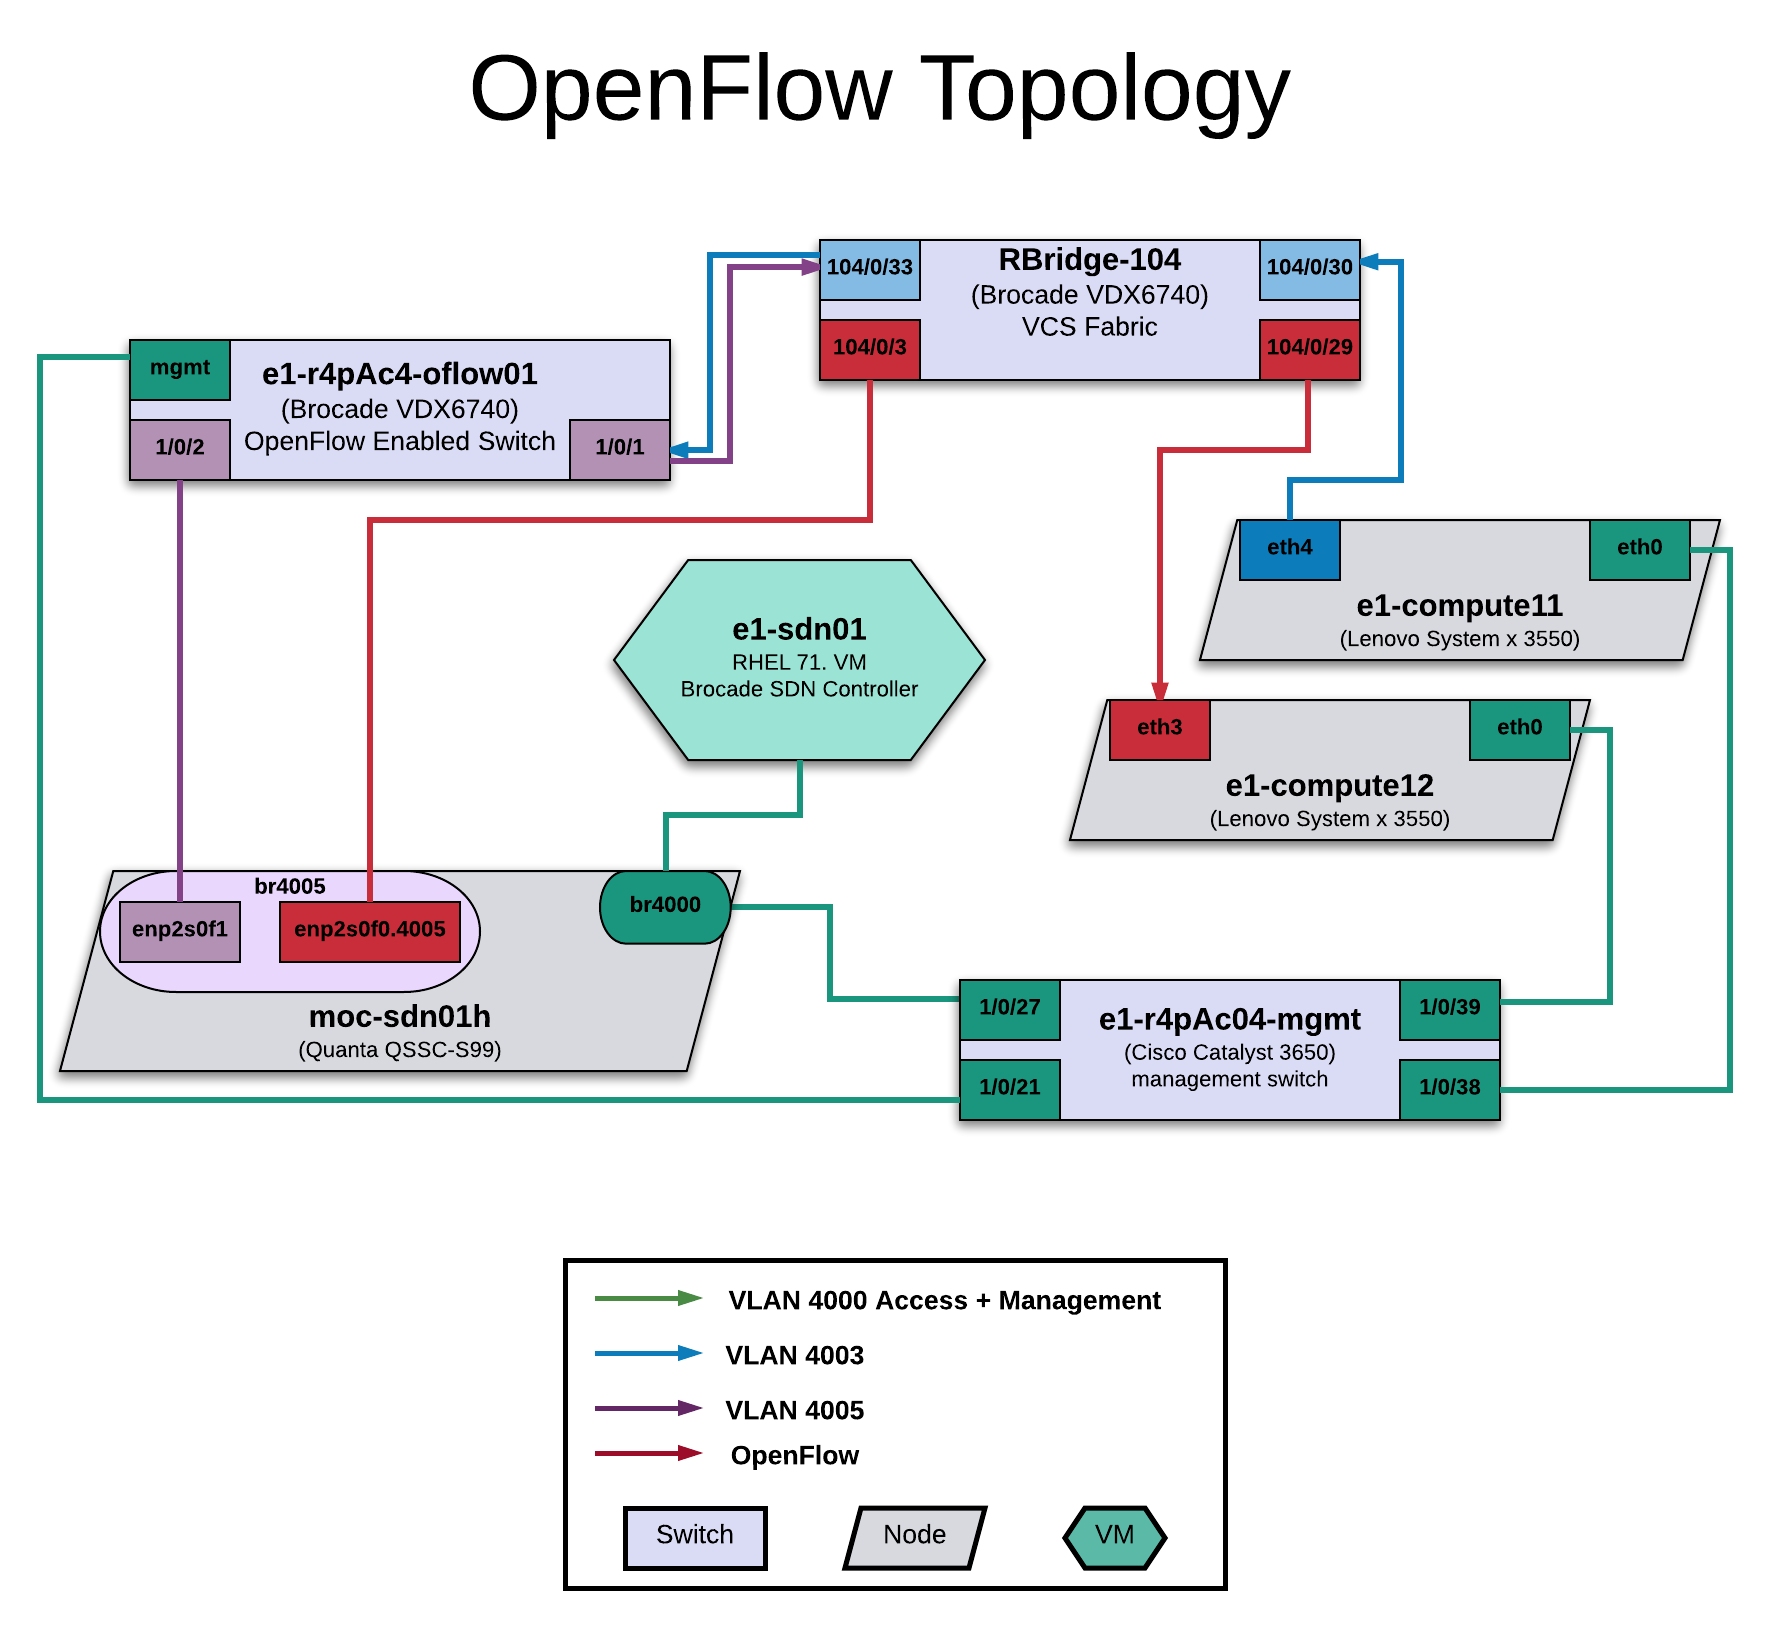 ../_images/openflow_topology_color.png